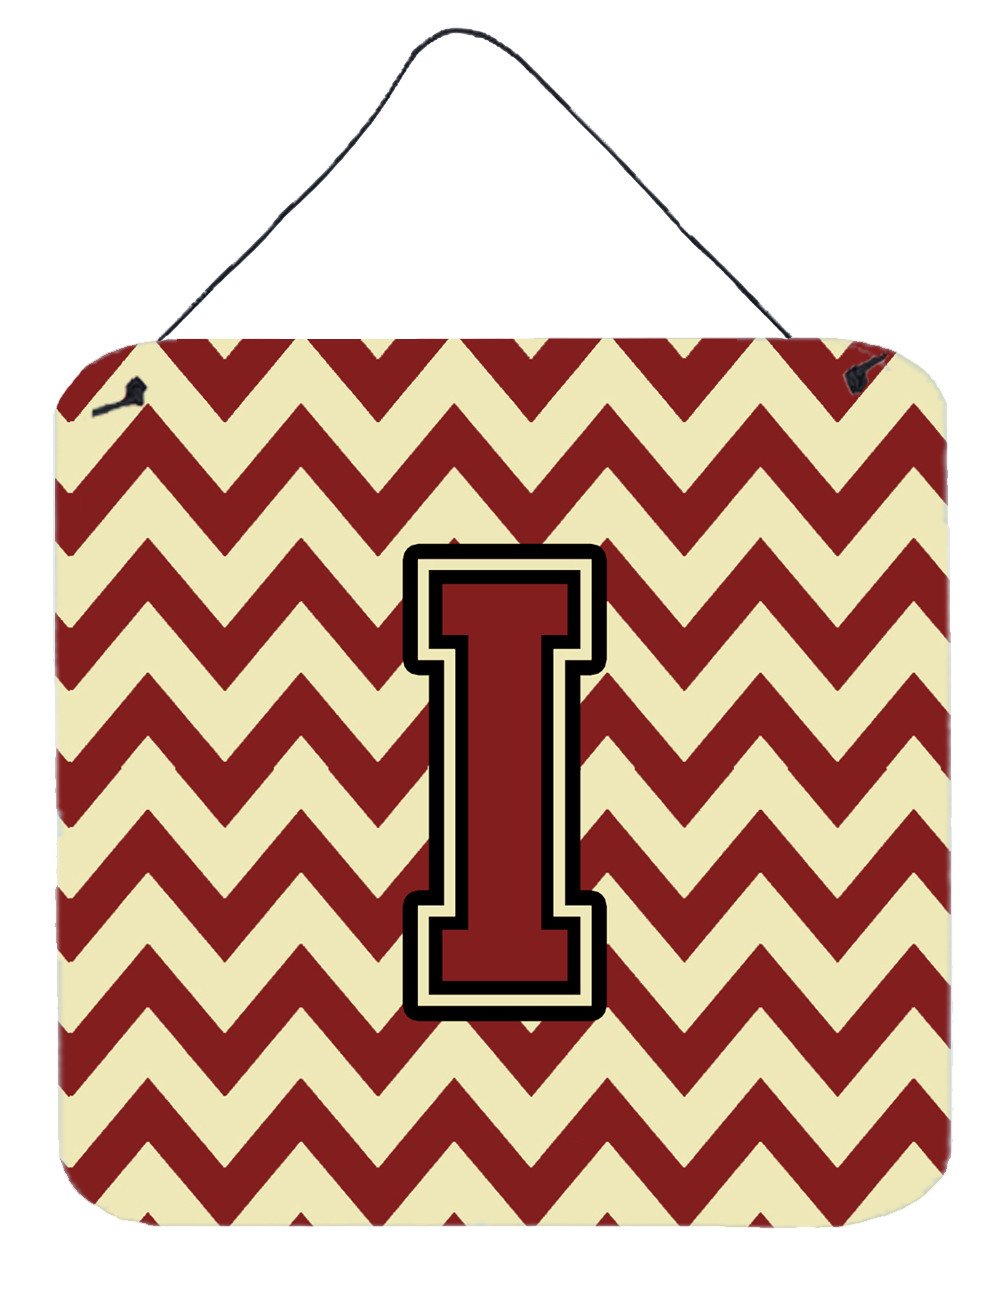 Letter I Chevron Maroon and Gold Wall or Door Hanging Prints CJ1061-IDS66 by Caroline's Treasures